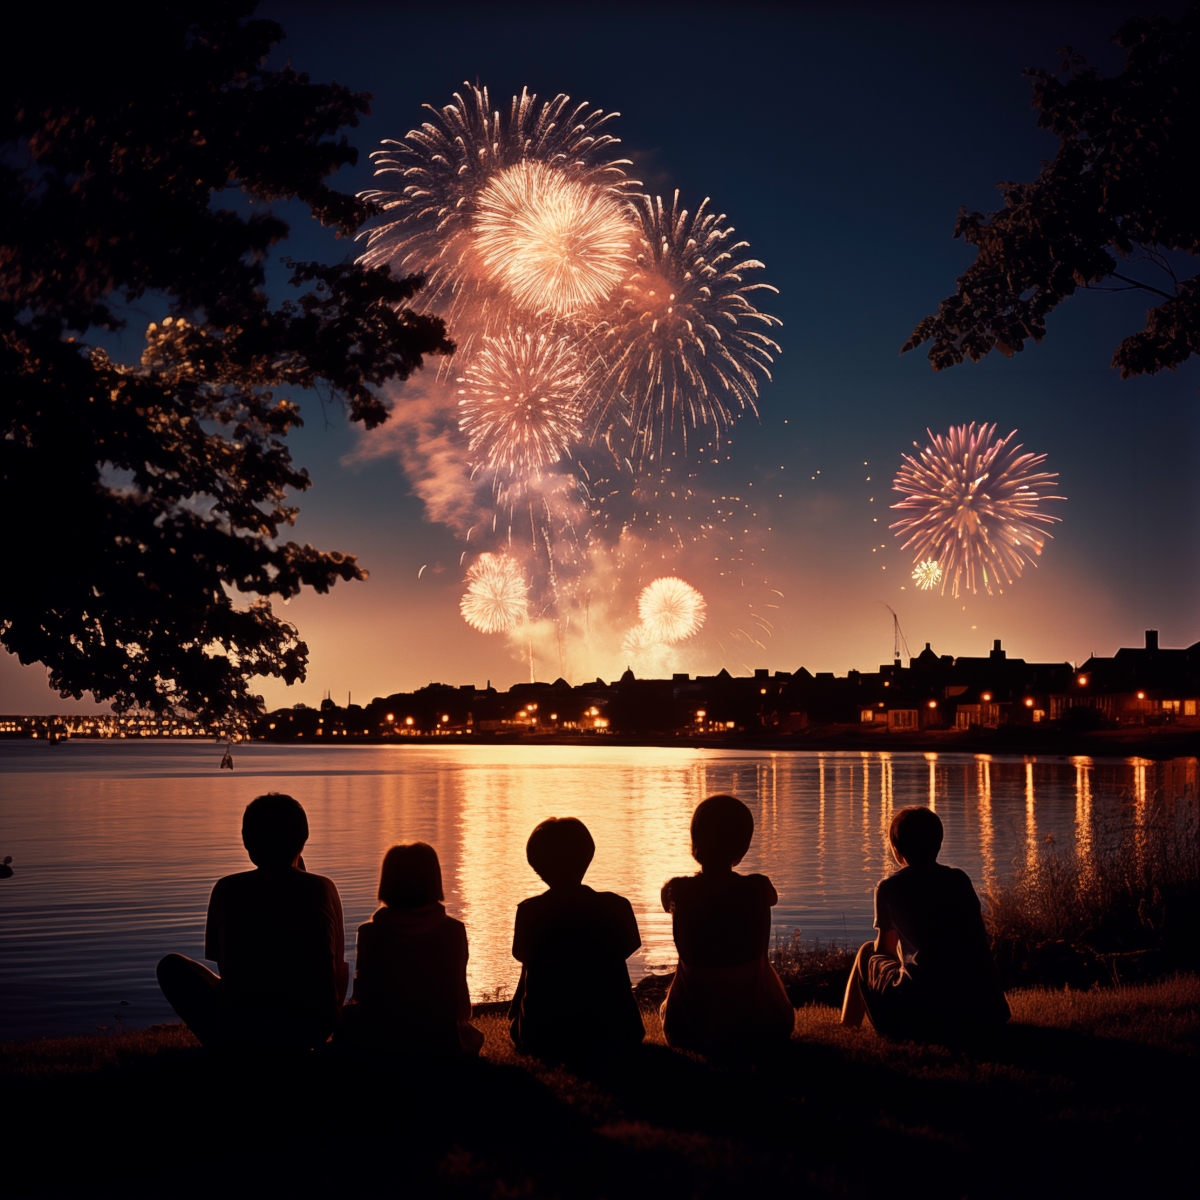 fireworks over a lake